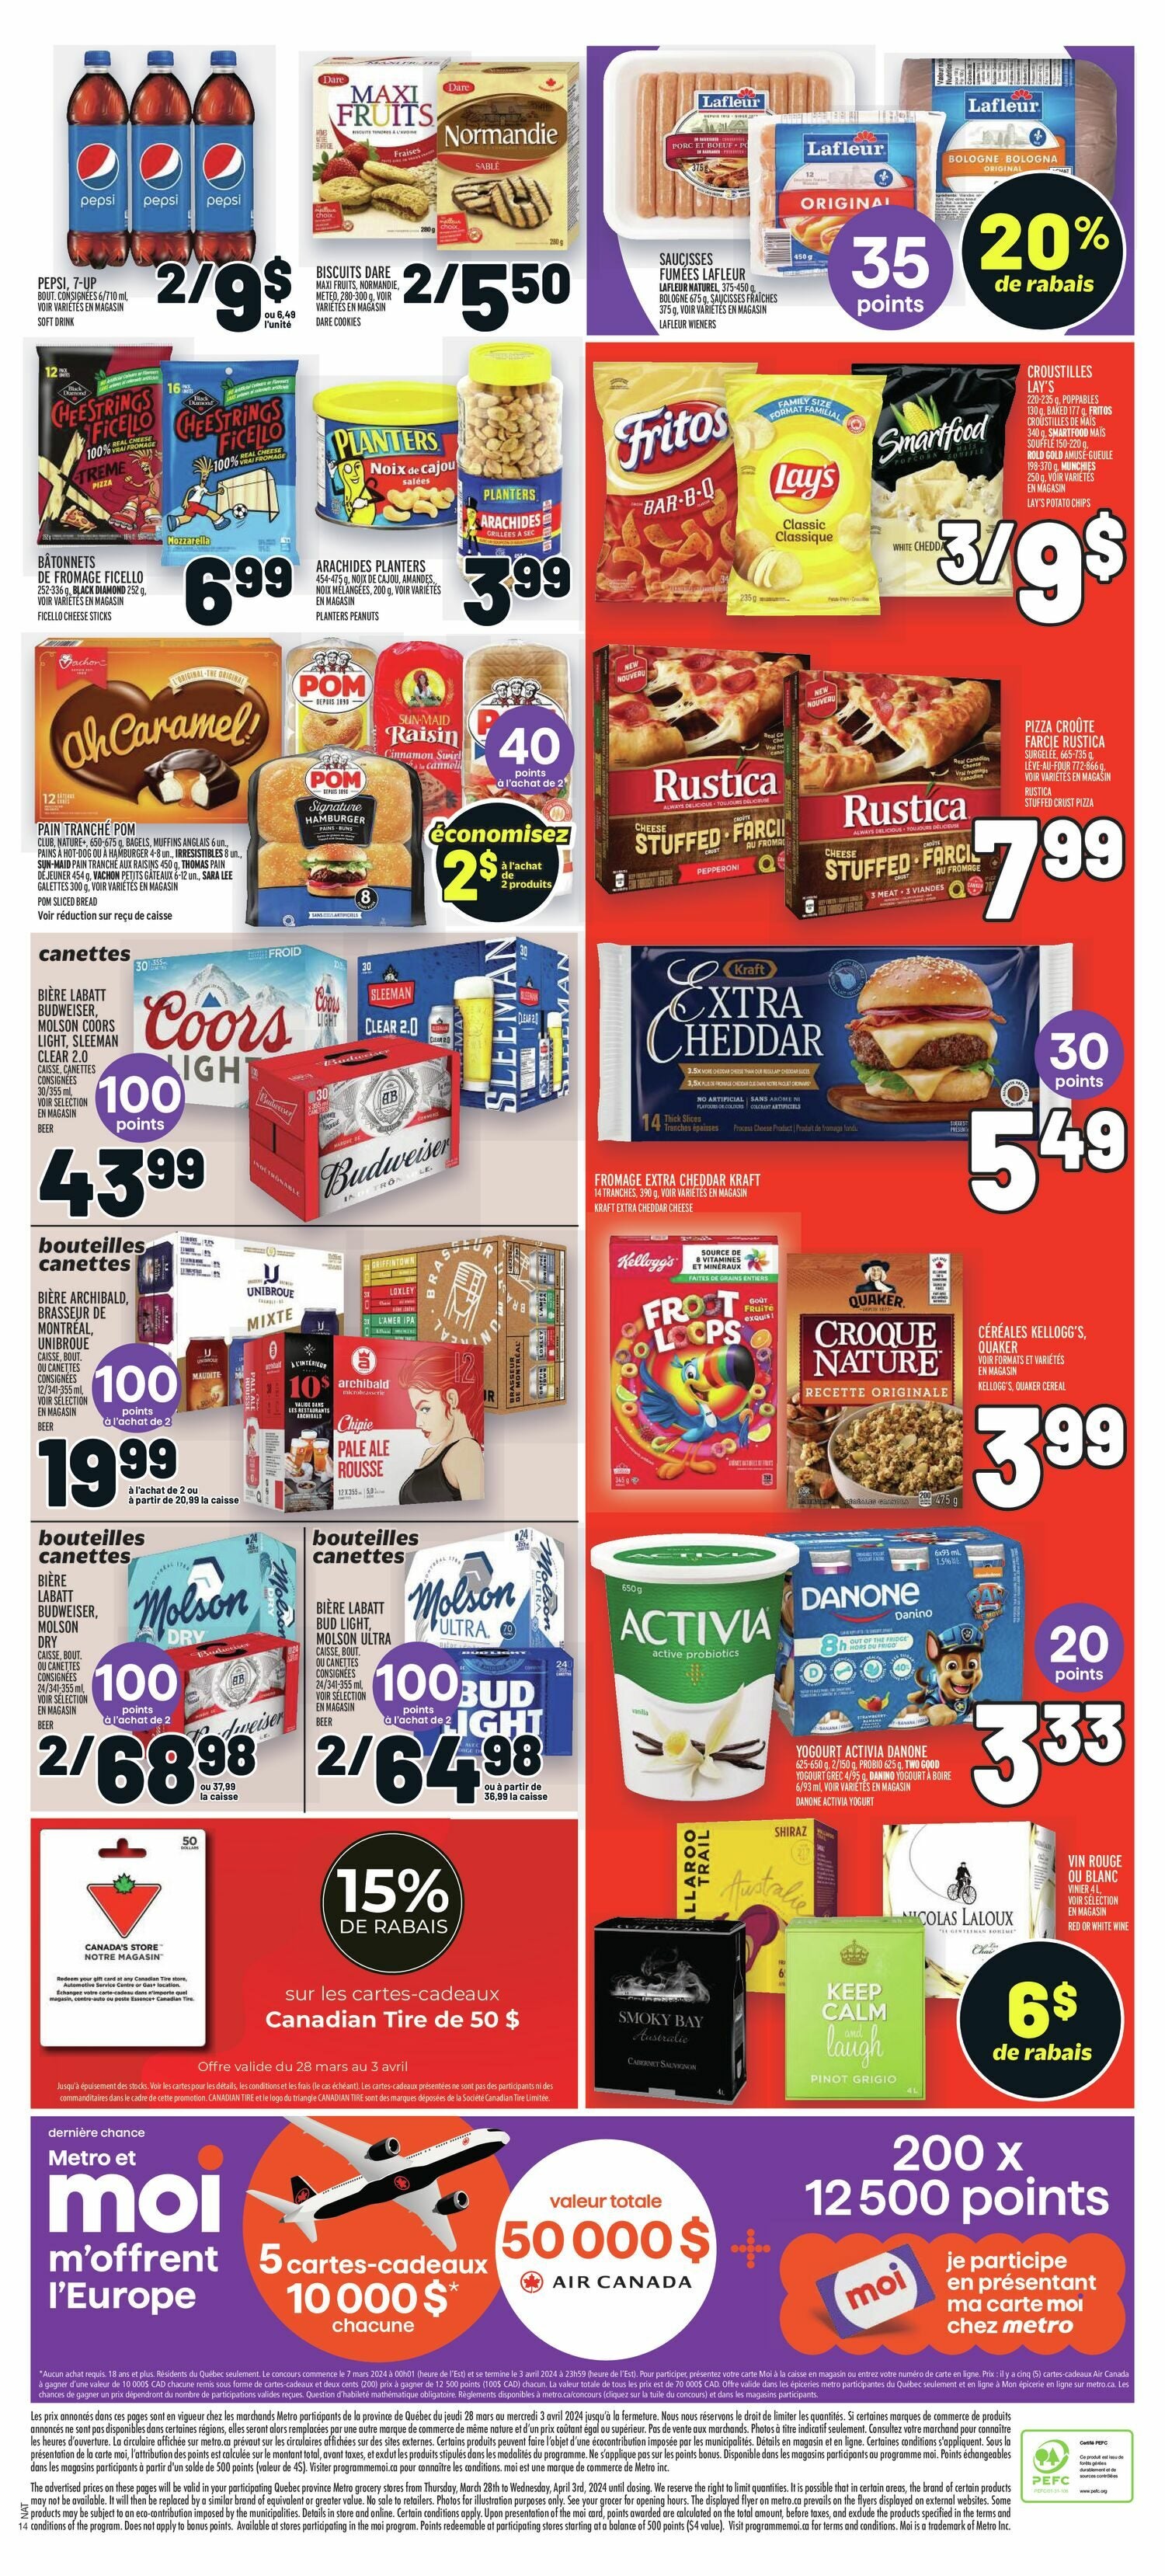 Canadian Tire (ON) Flyer December 7 to 14